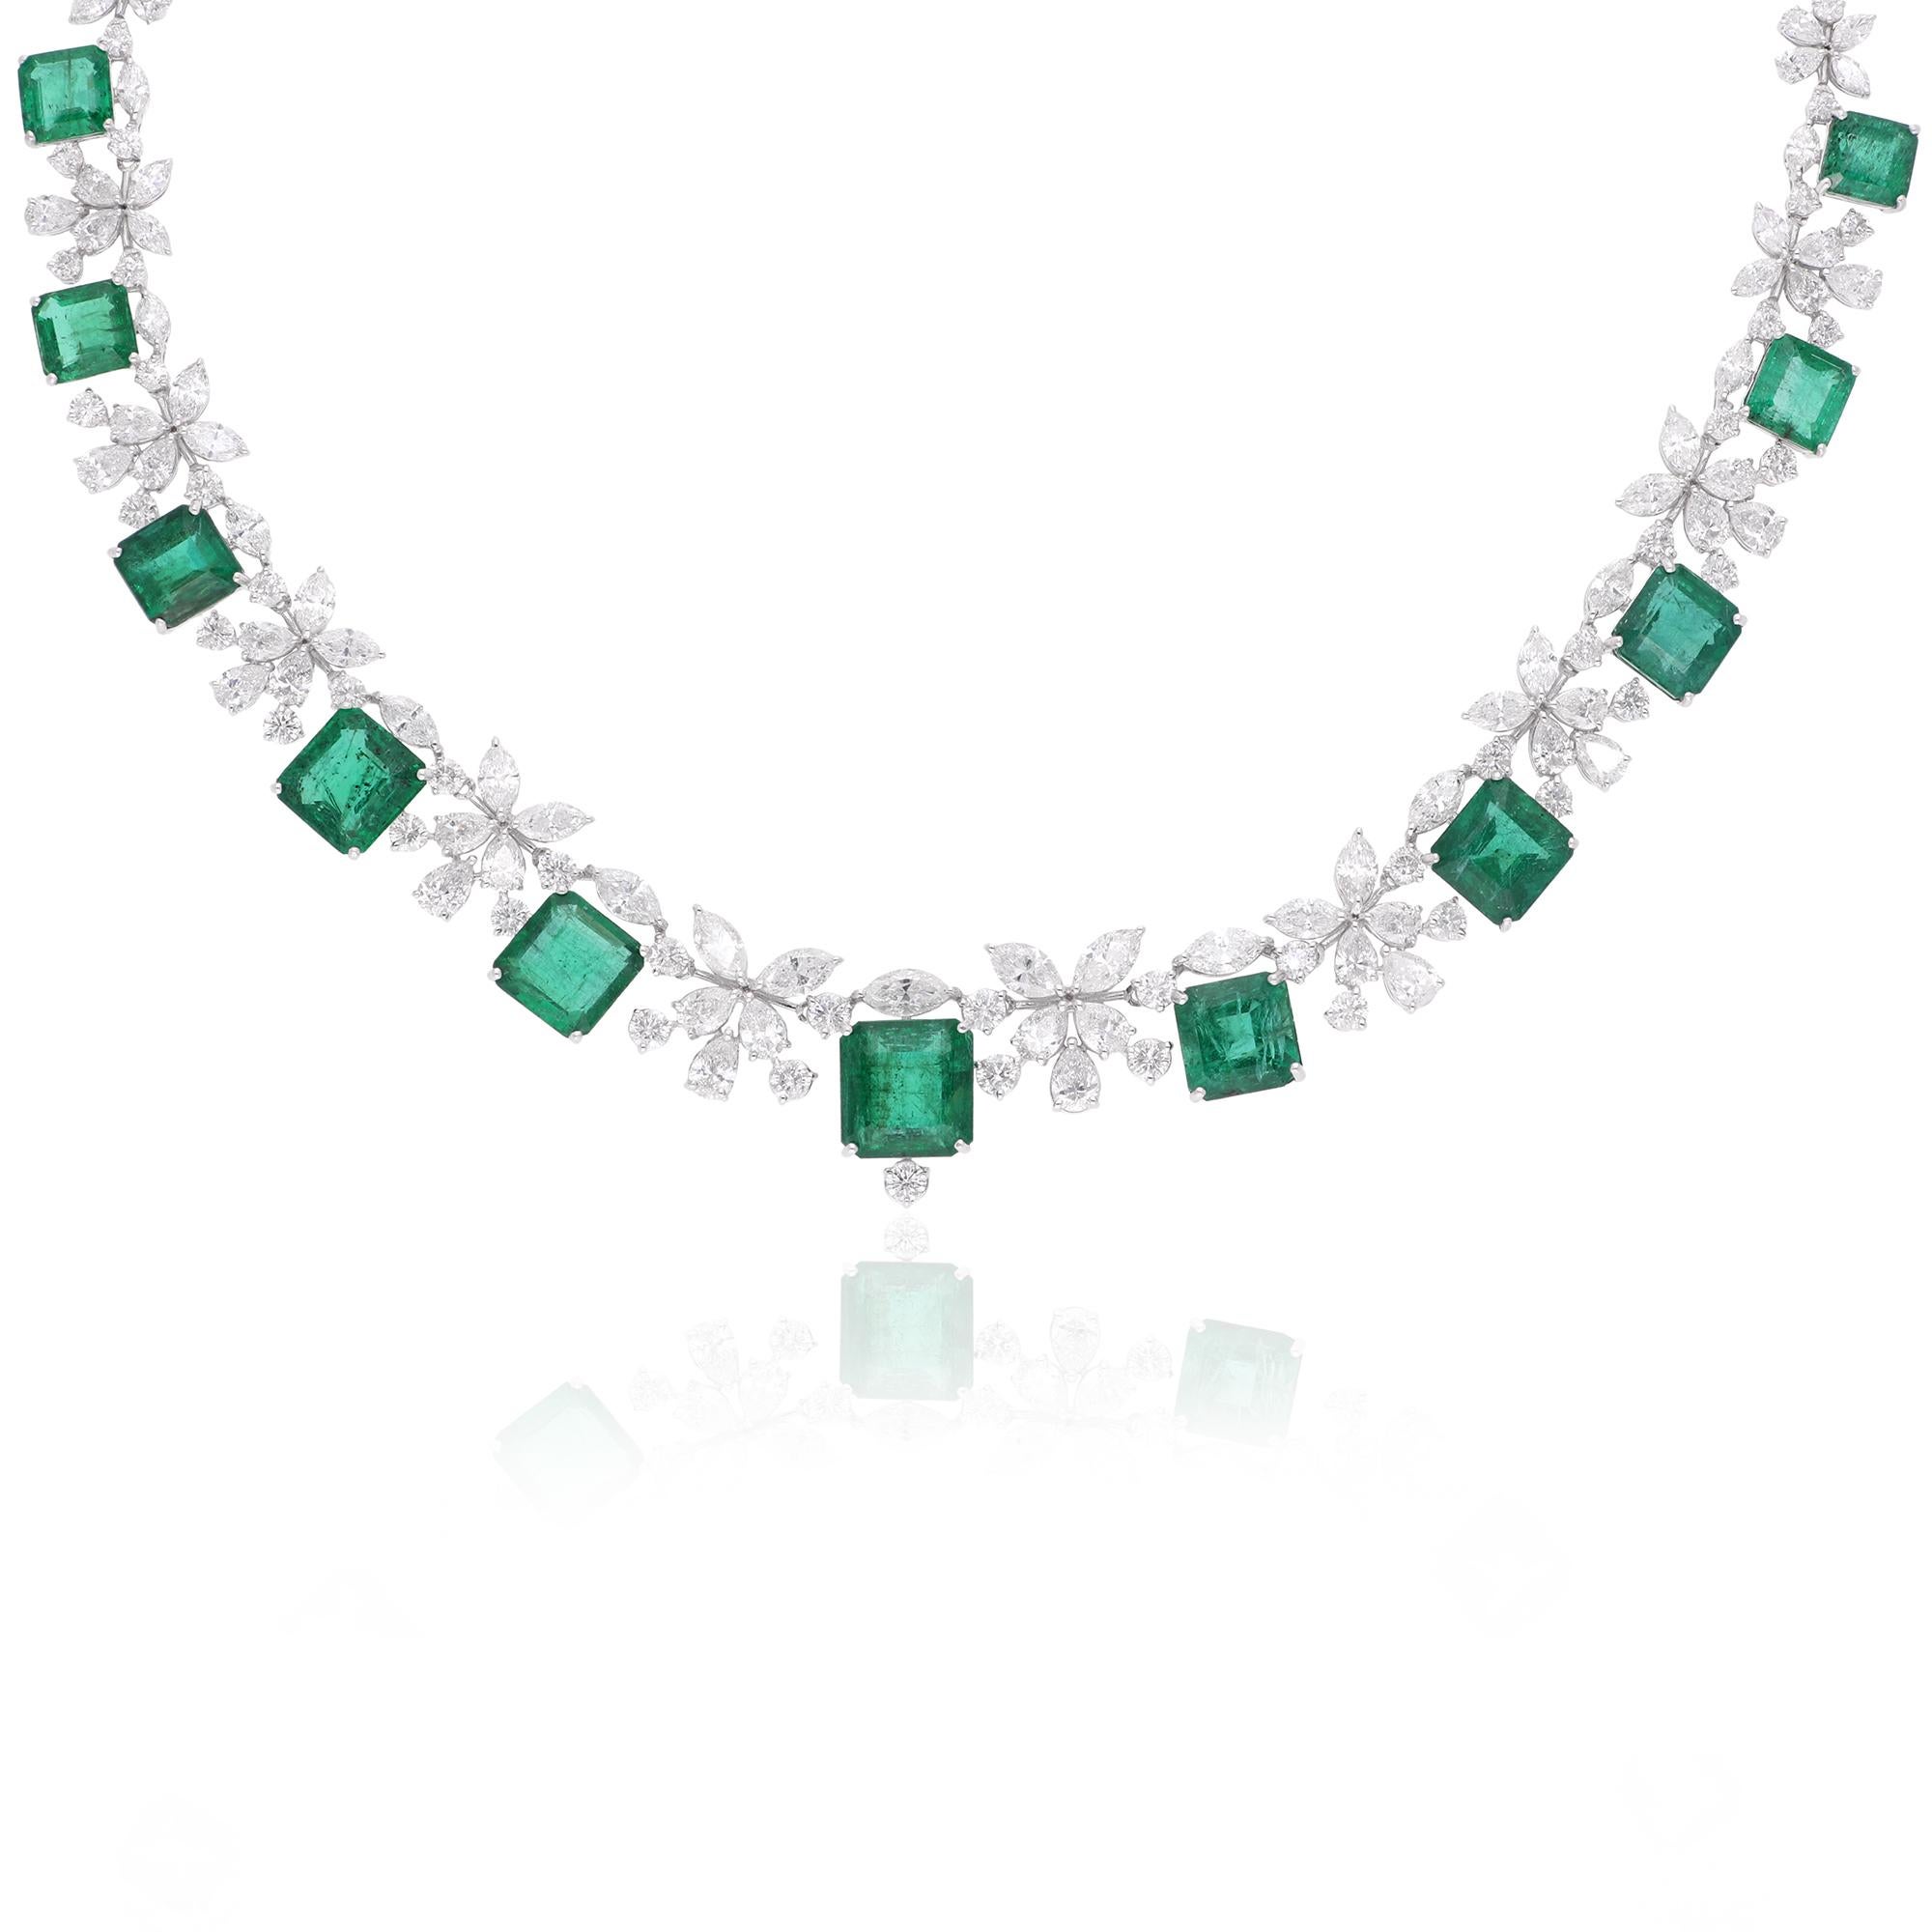 Surrounding the emerald are sparkling diamonds, meticulously set by skilled artisans in gleaming 14 karat white gold. These diamonds, chosen for their exceptional brilliance and fire, add a touch of celestial radiance to the necklace, enhancing the